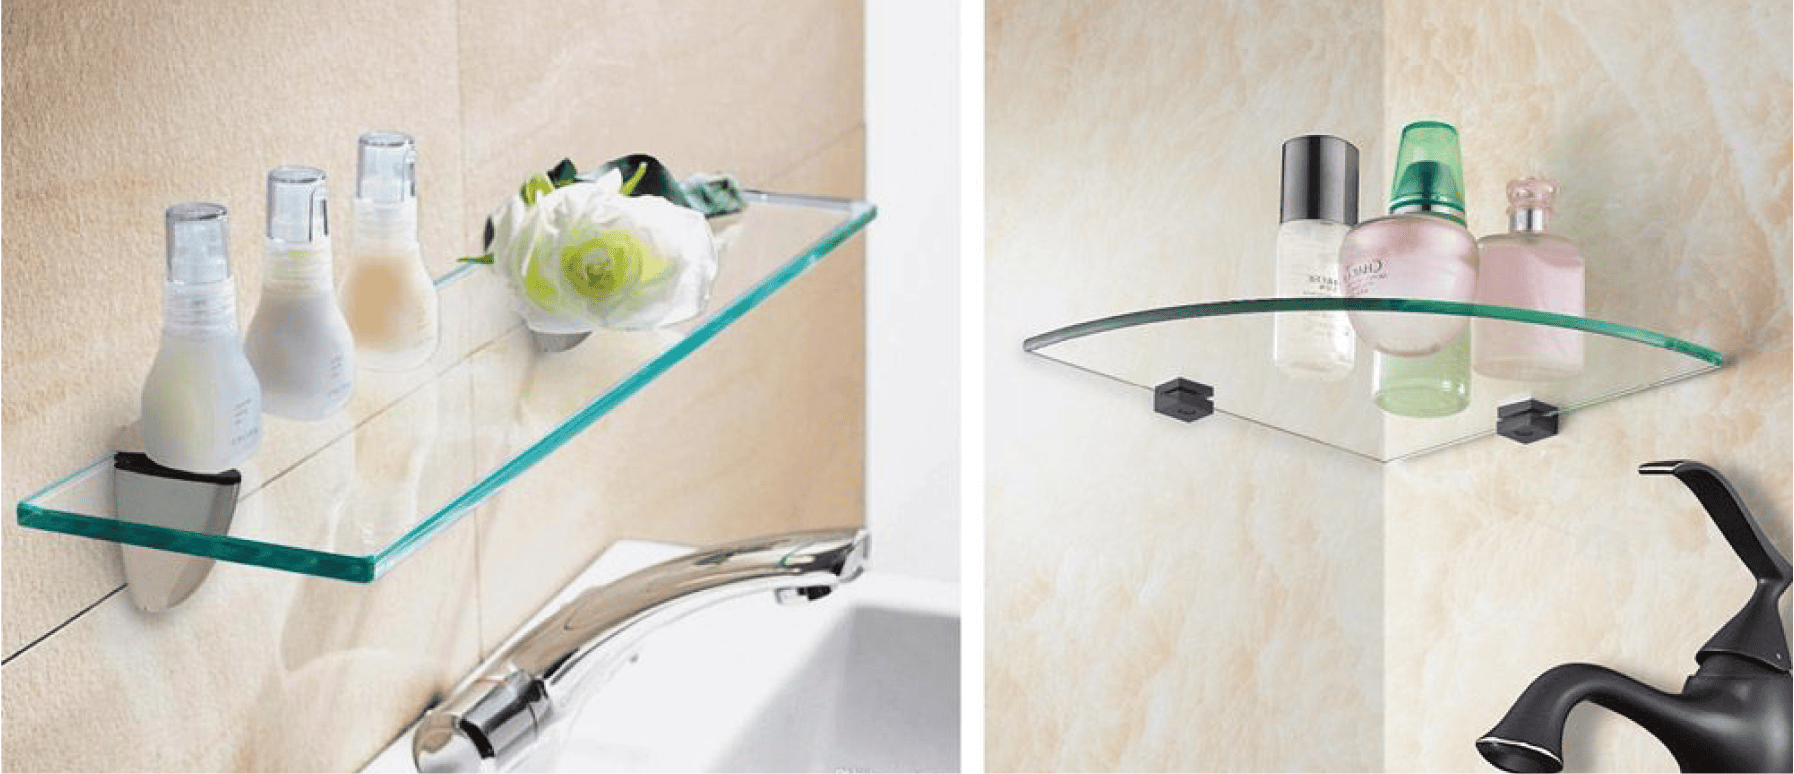 A bathroom glass shelf with a soap dispenser and soap, adding functionality and style to your bathroom decor.